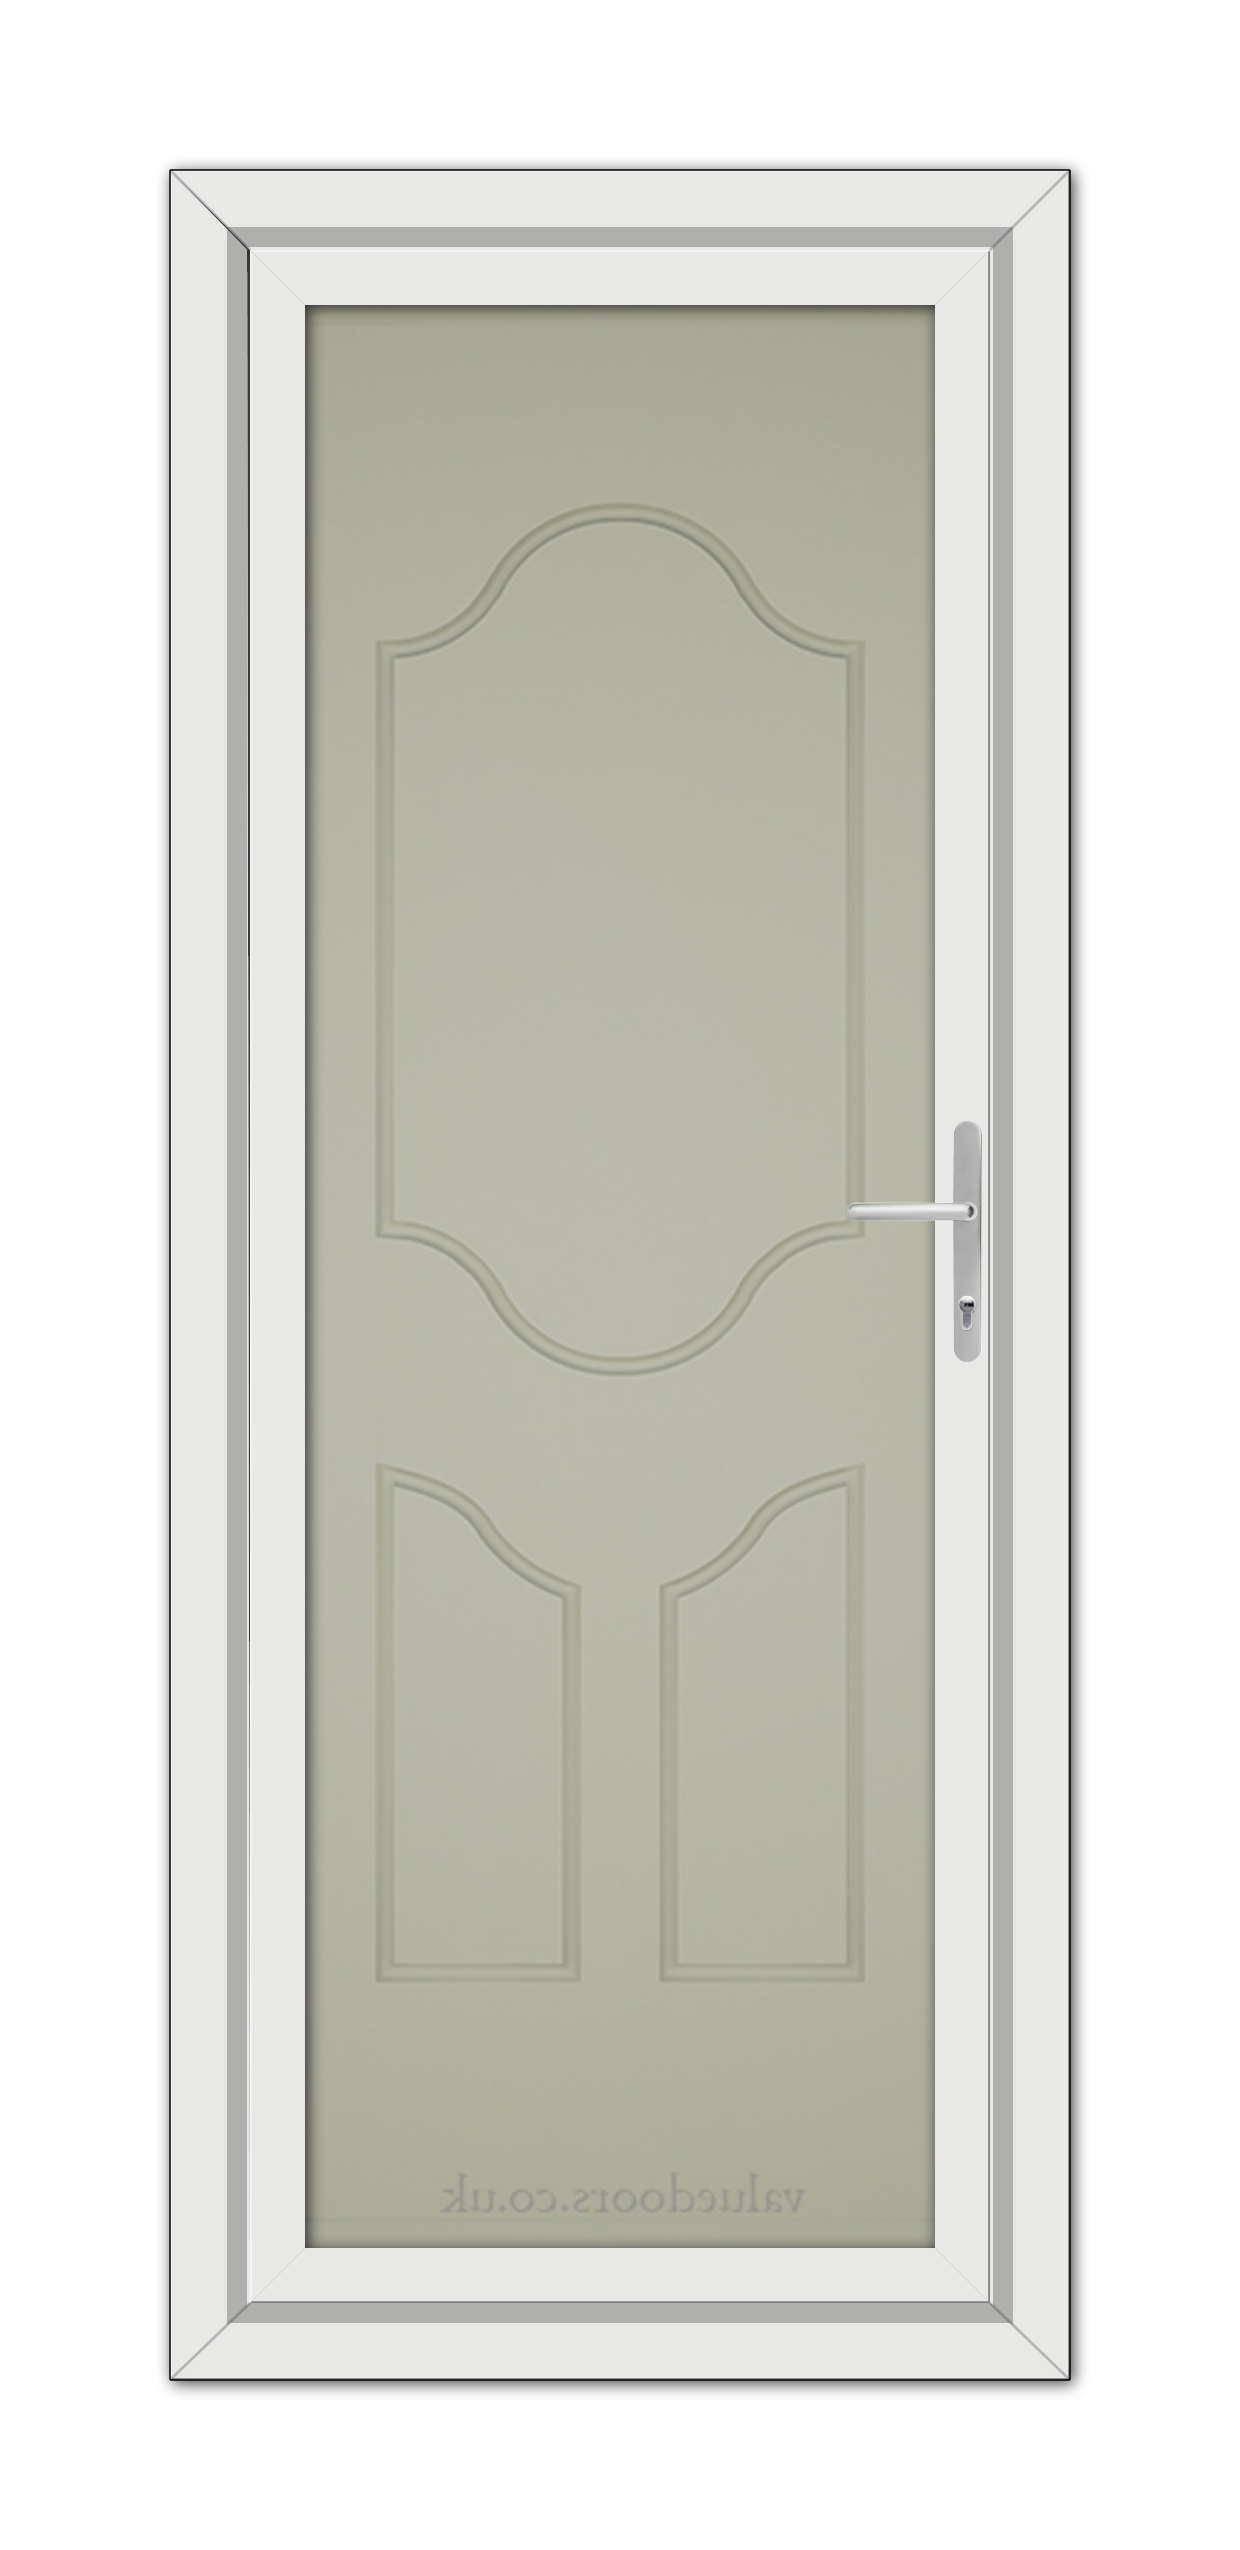 A vertical image of a closed, Agate Grey Althorpe Solid uPVC Door with a white frame, featuring an ornate upper panel and a handle on the right side.